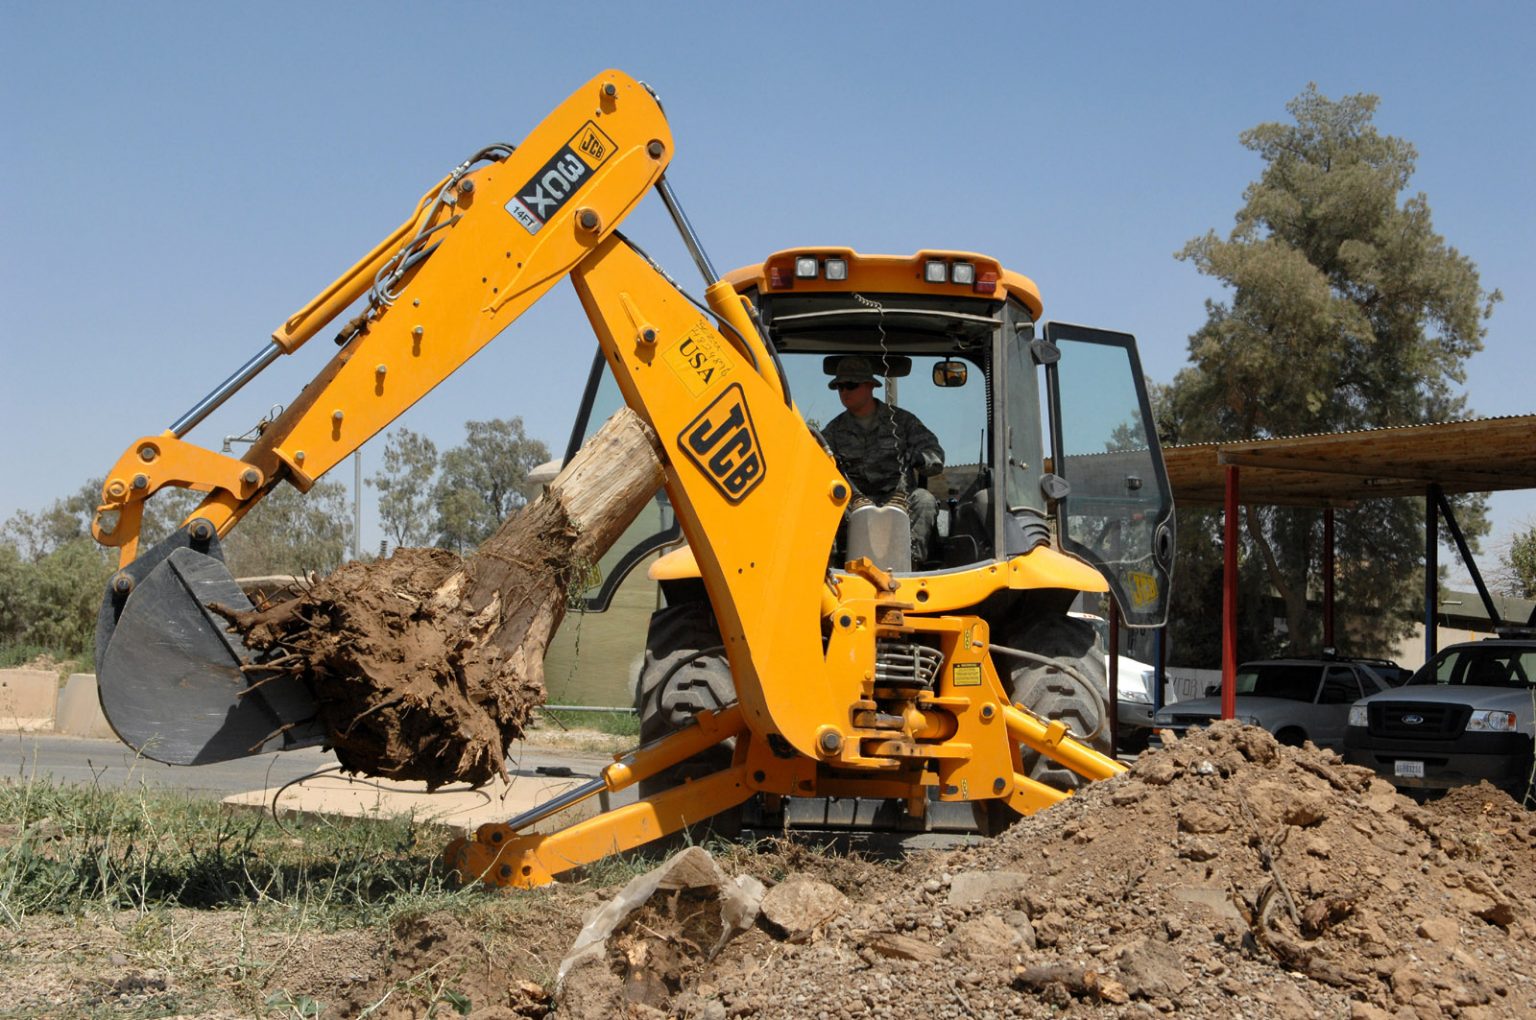 How Much Does it Cost to Rent an Excavator For a Day? Opptrends 2021